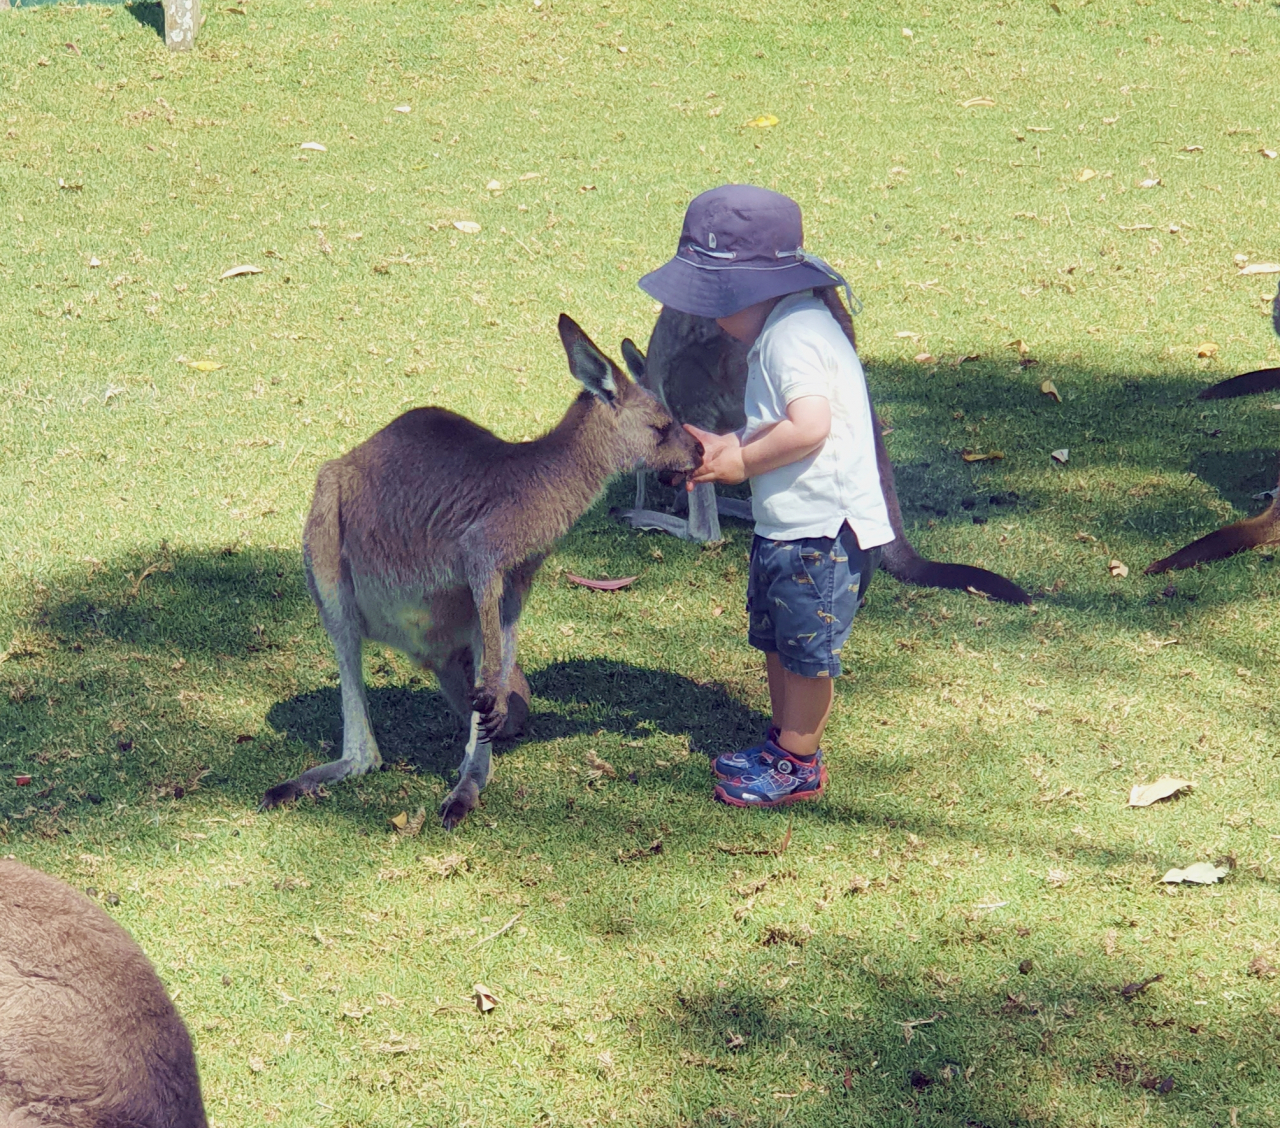 Symbio Wildlife Park’s lolloping kangaroos and wallabies are gentle enough for even small children to feed. (Paul Kerry/The Korea Herald)